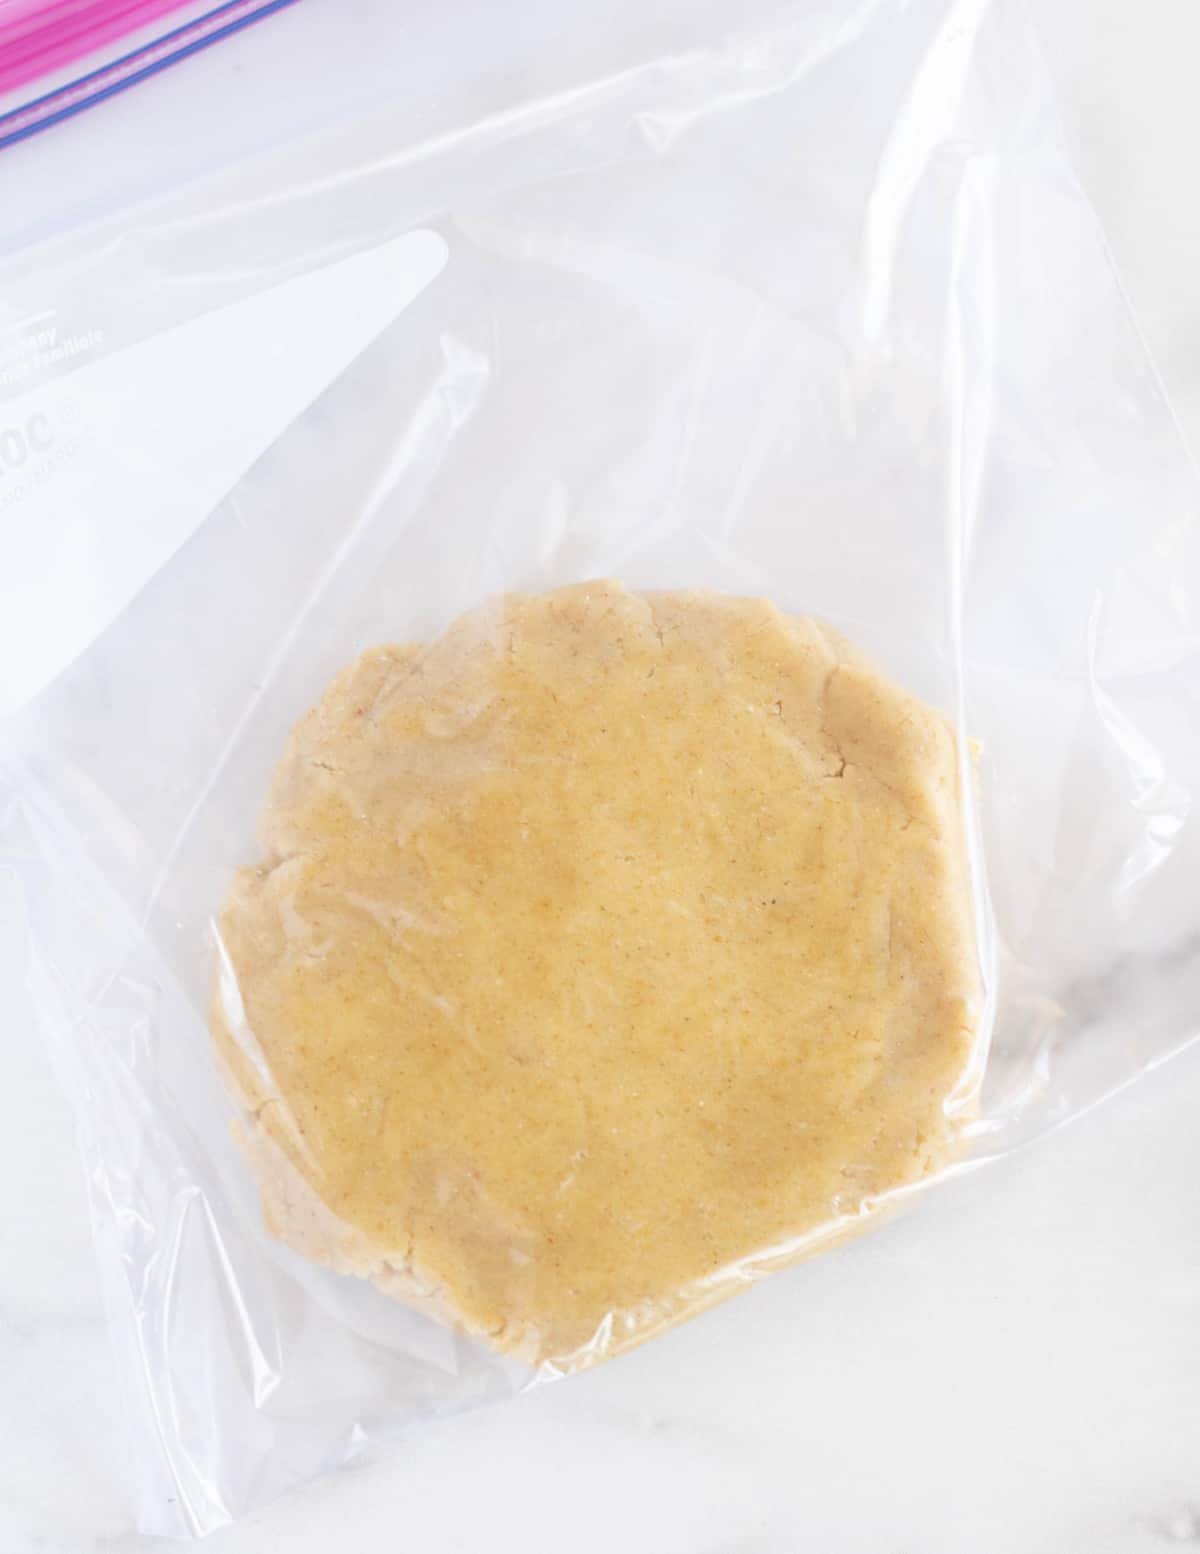 unbaked pie dough in a plastic baggie